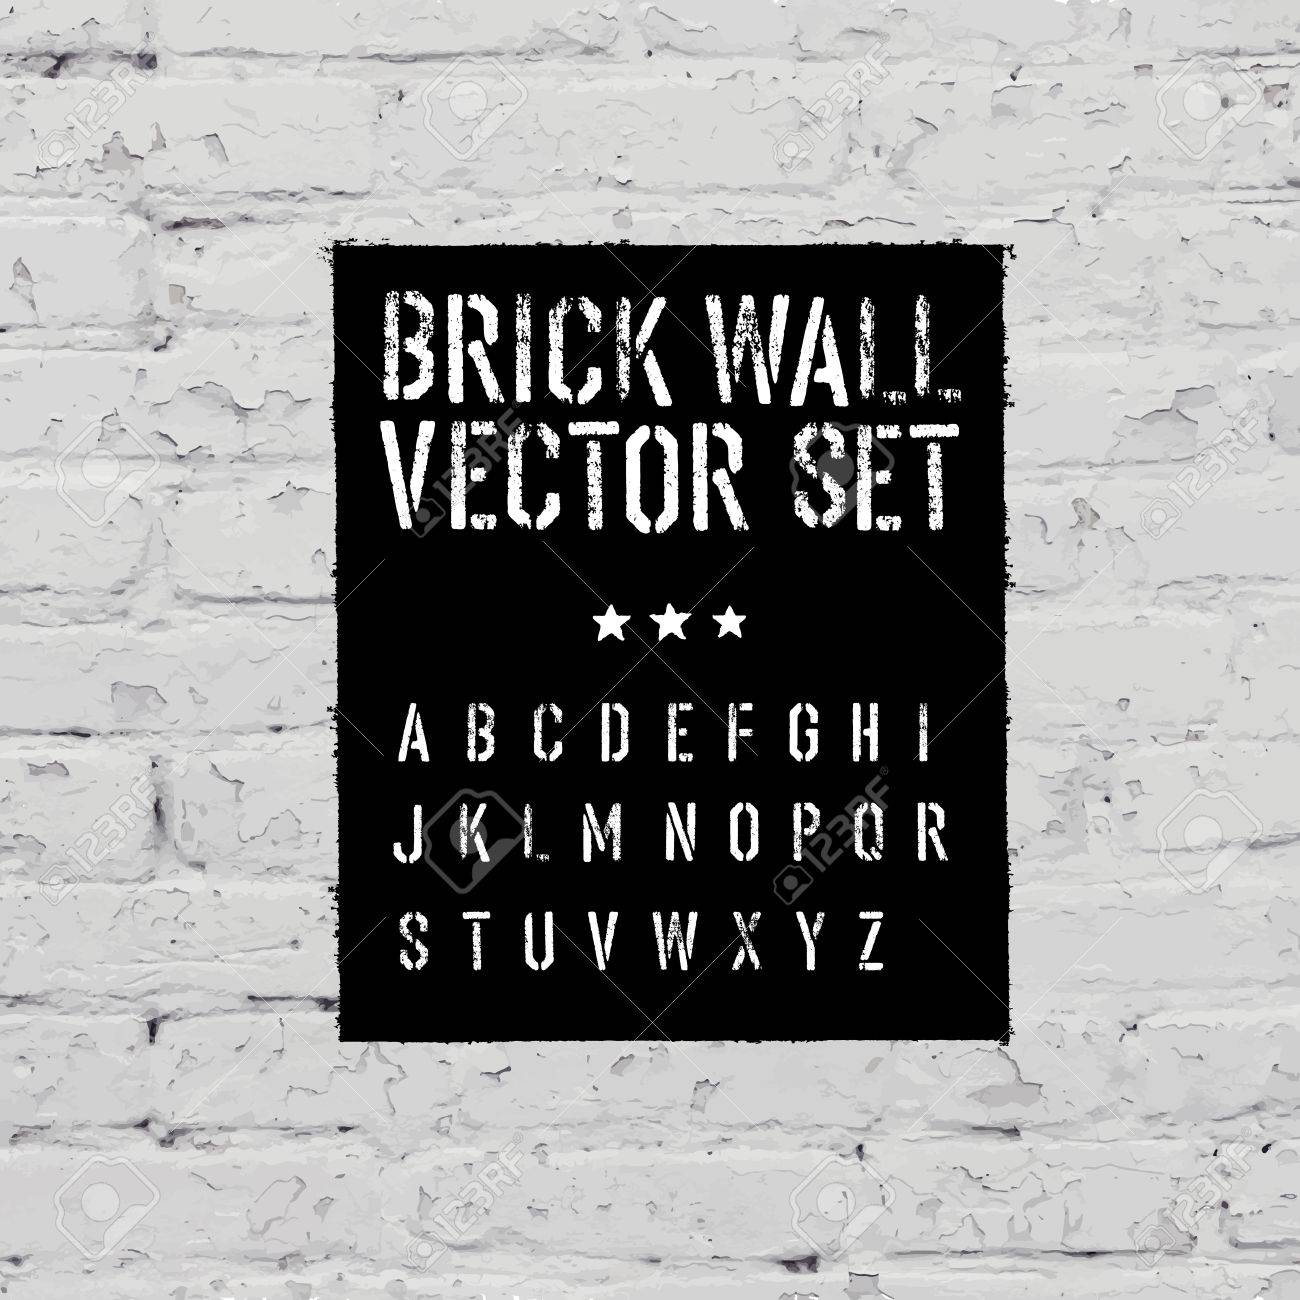 Brick Traced Texture, Stencil Alphabet And Grunge Rectangle